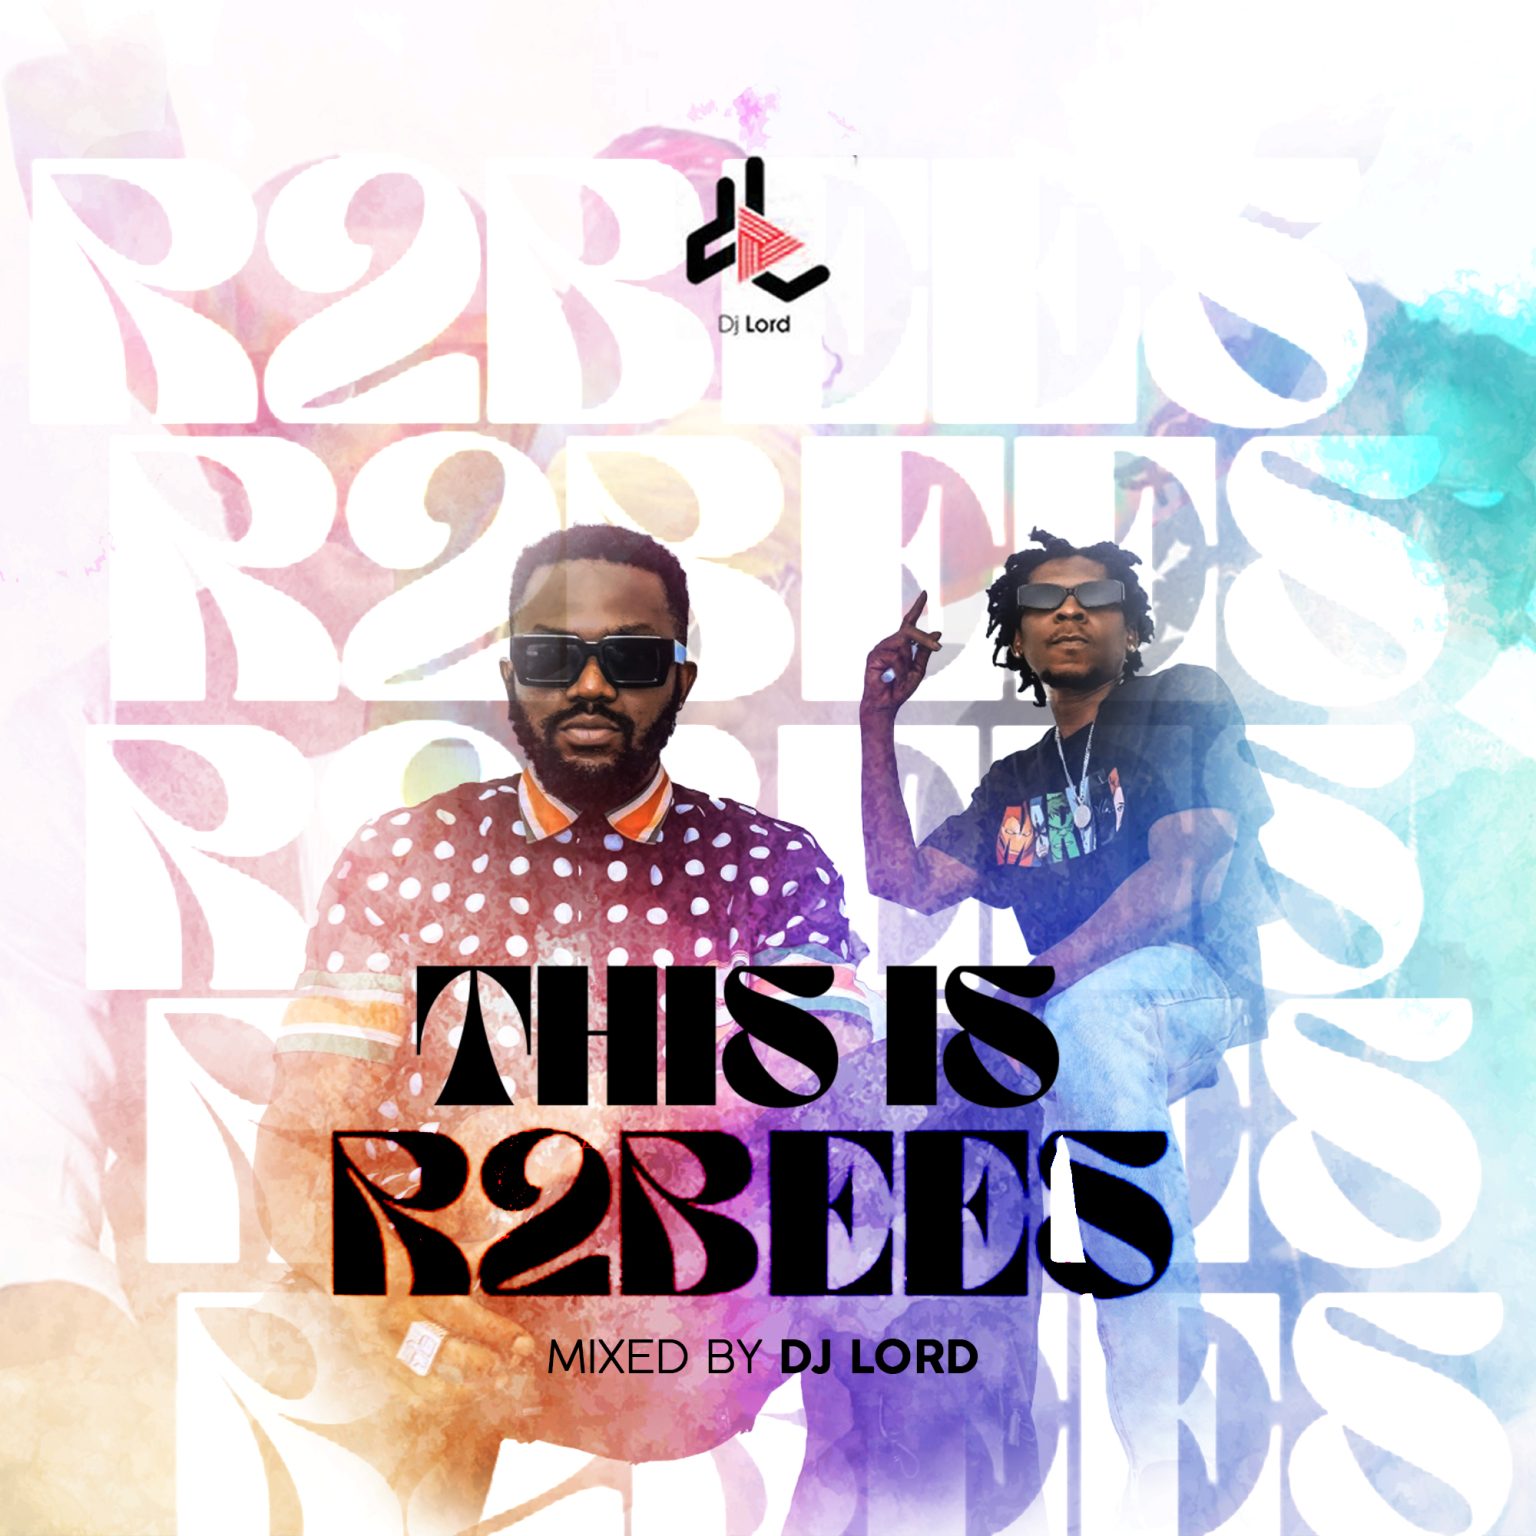 DJ Lord - This Is R2Bees (Mixtape)